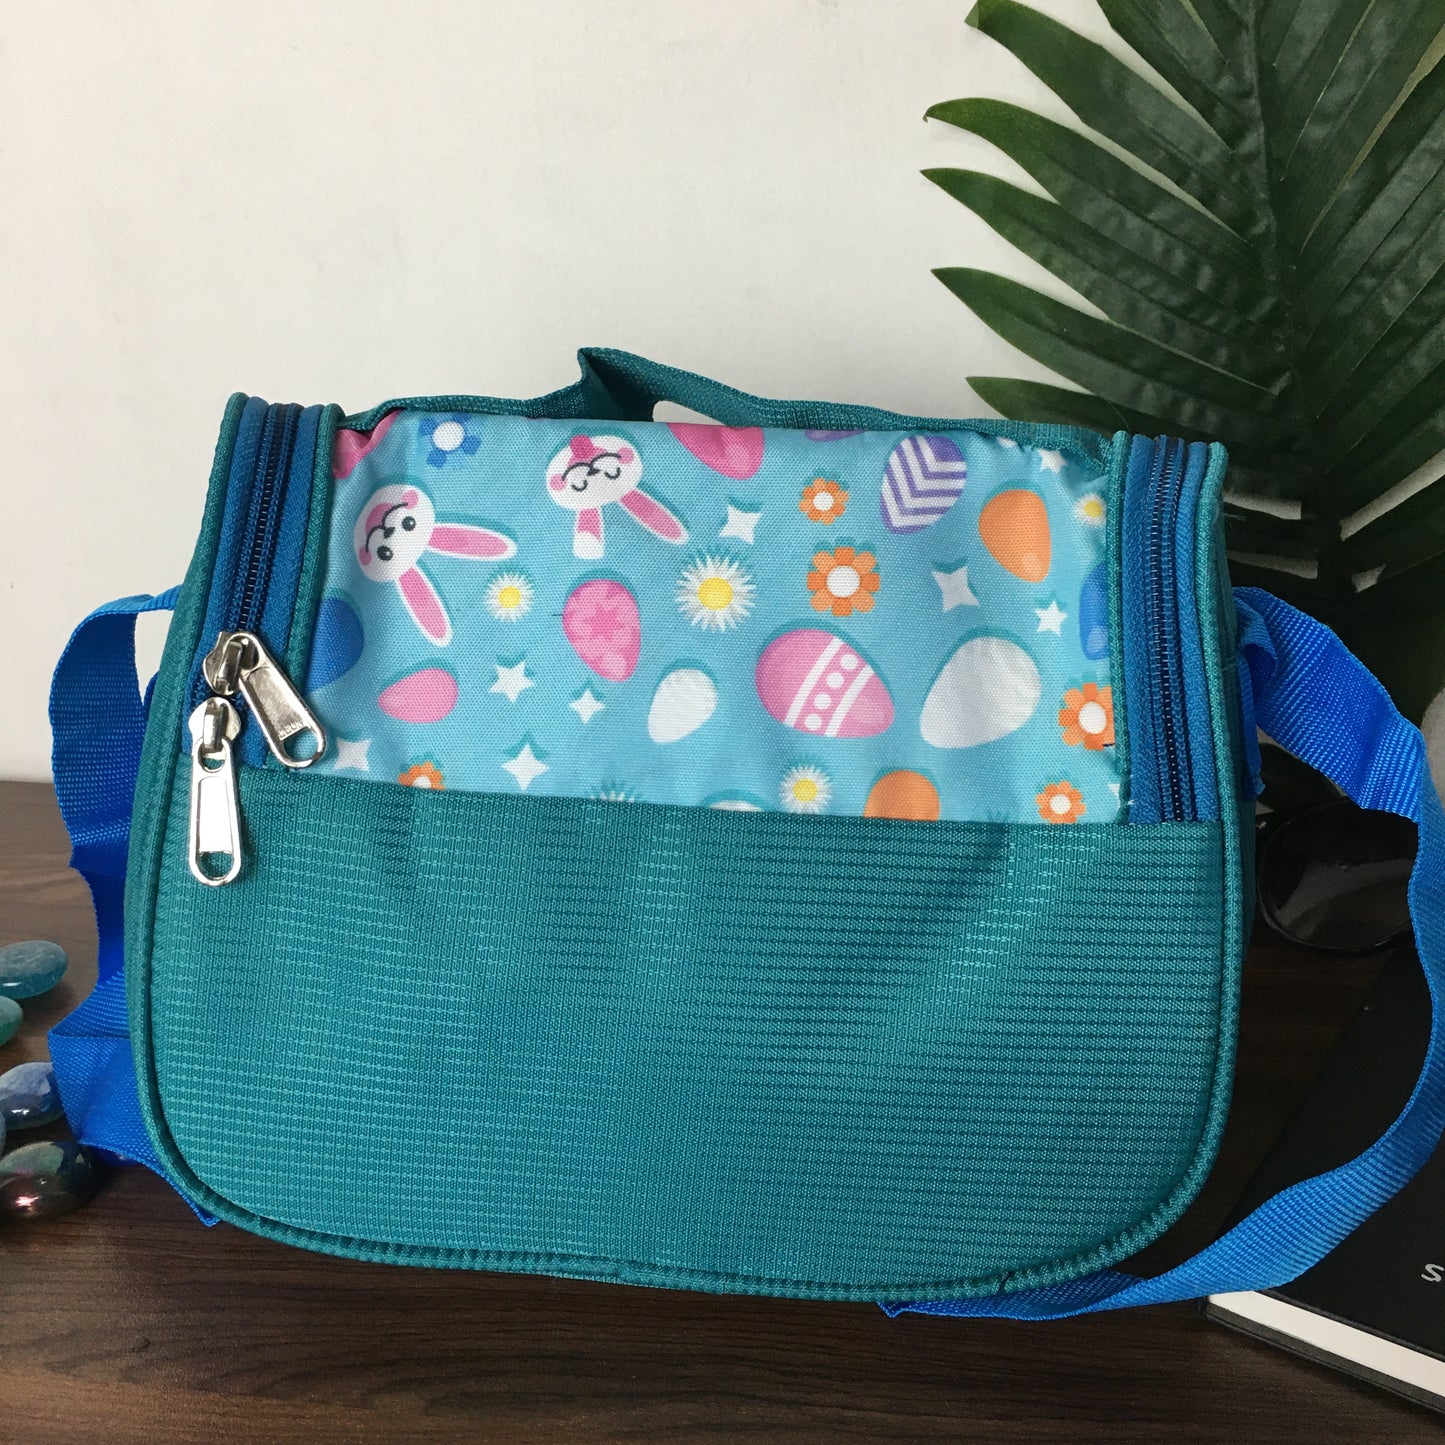 Cute Prints Lunch Bag with Thermal Insulation - Sky Blue